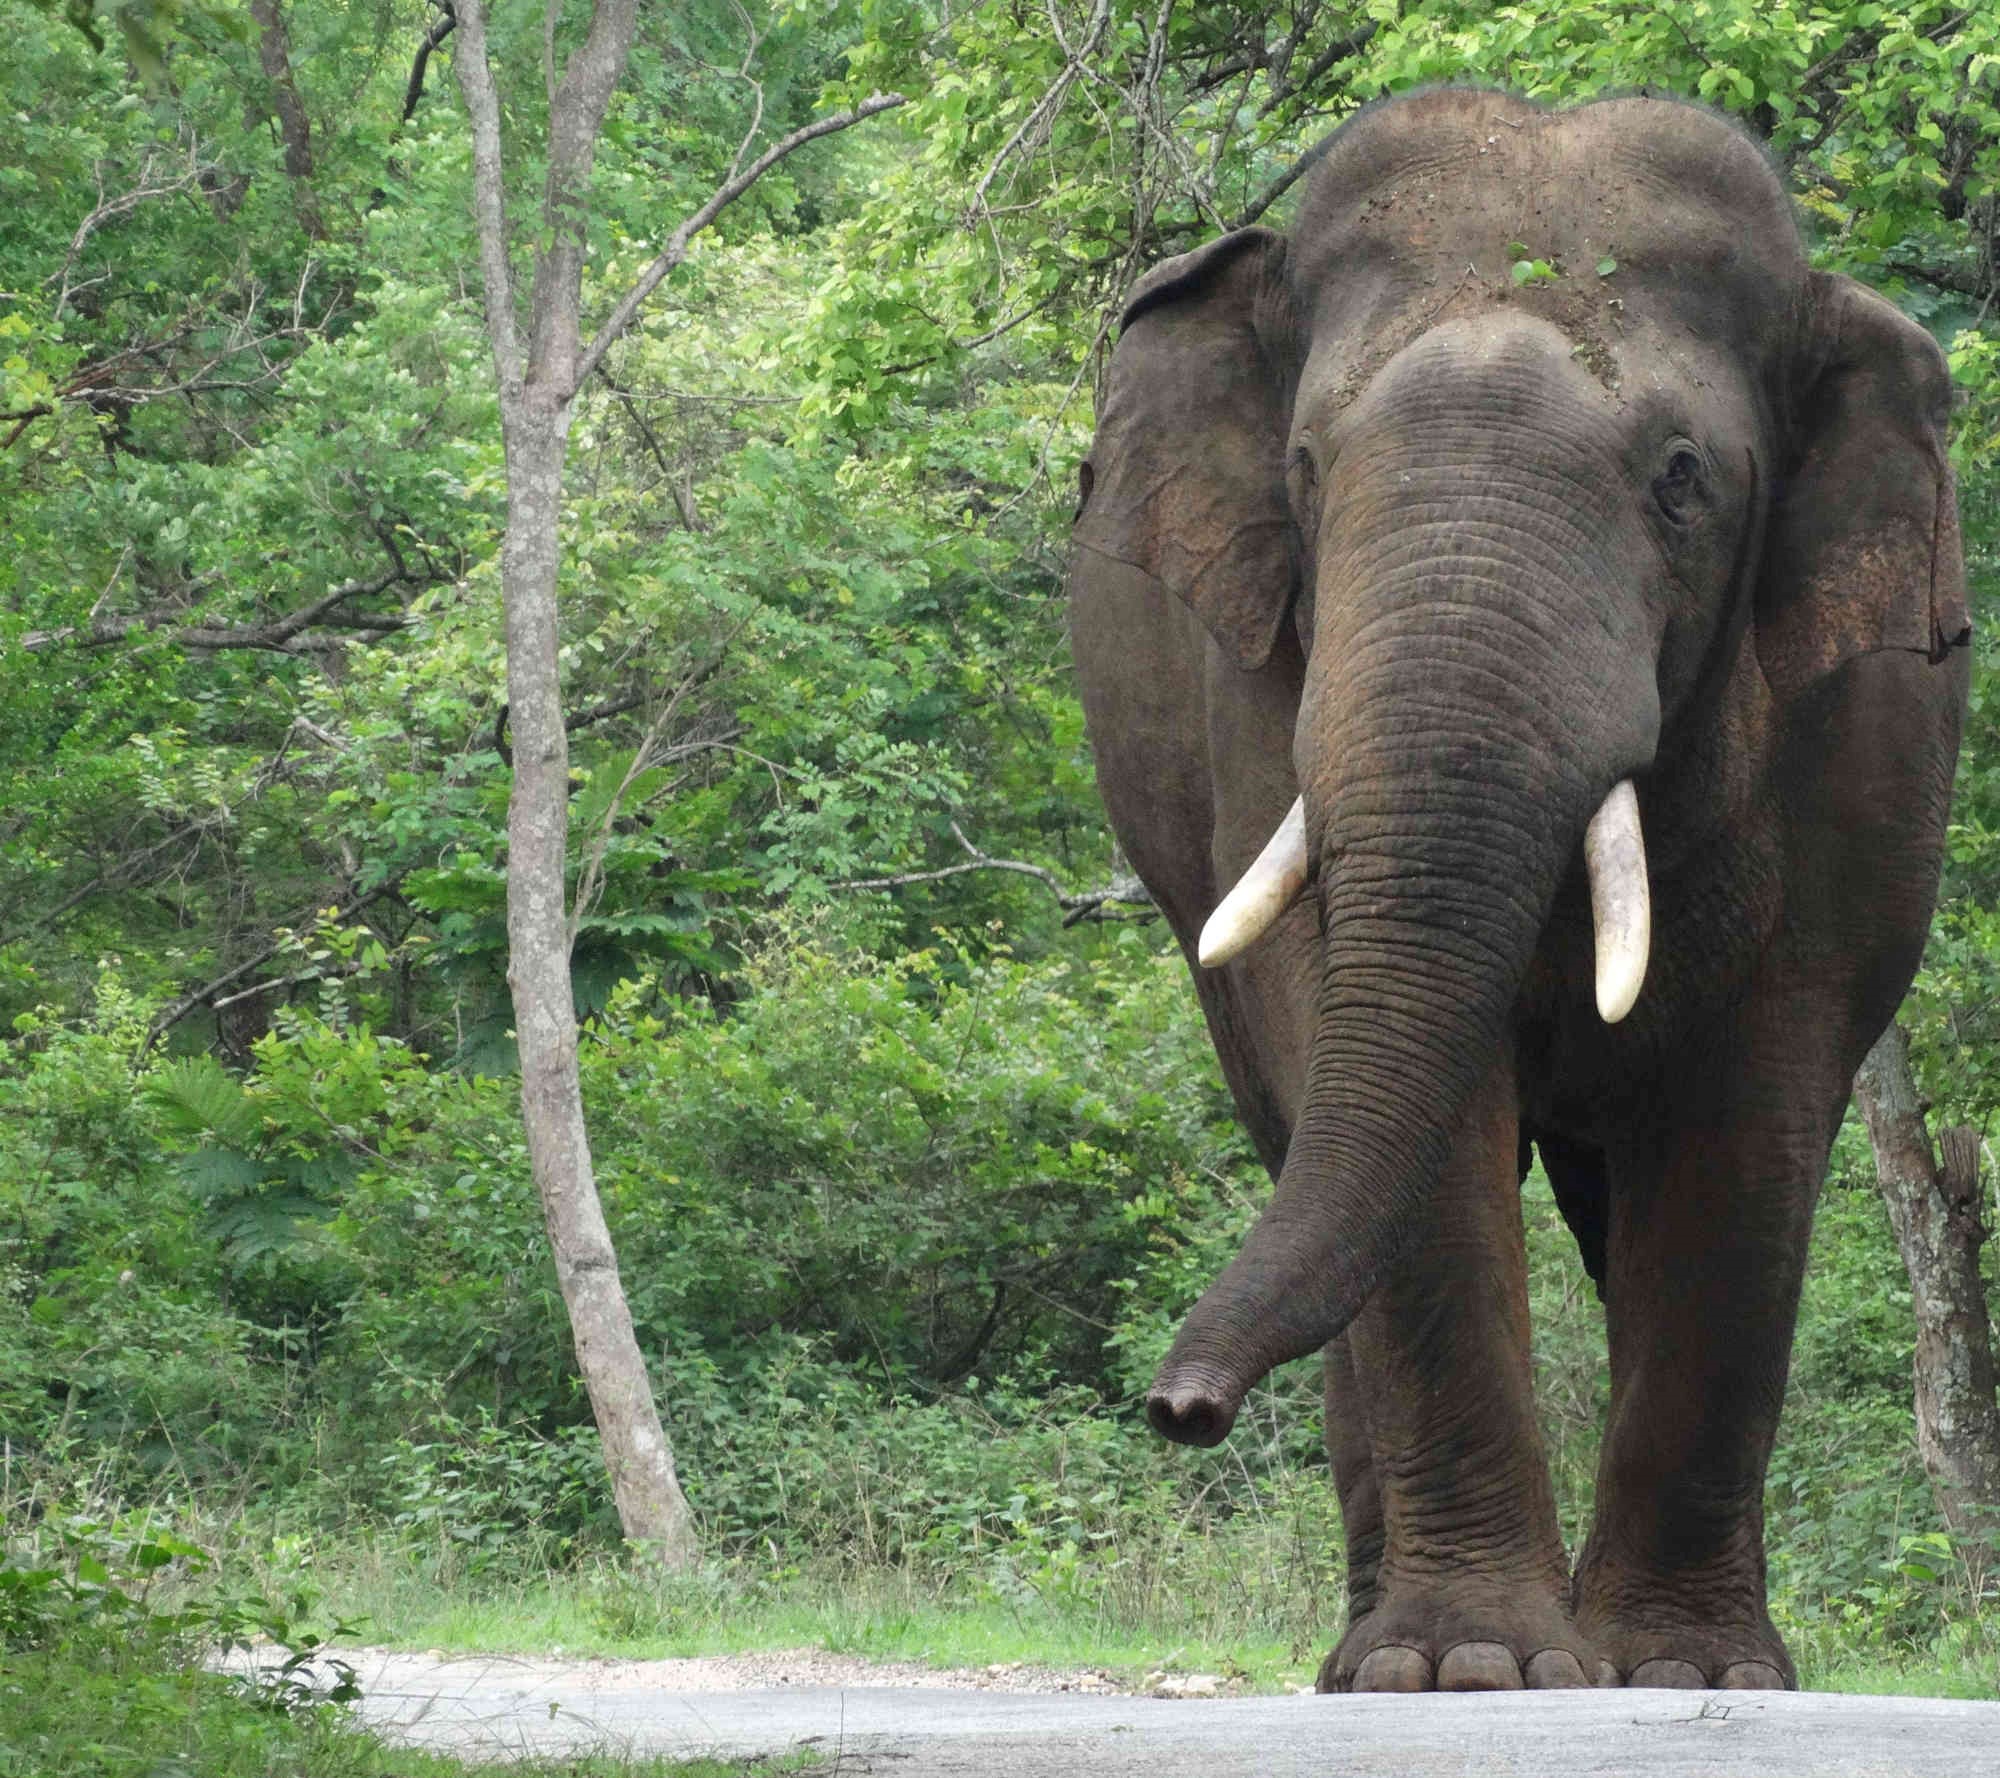 In India, A Nuanced View of How Elephants Make Decisions